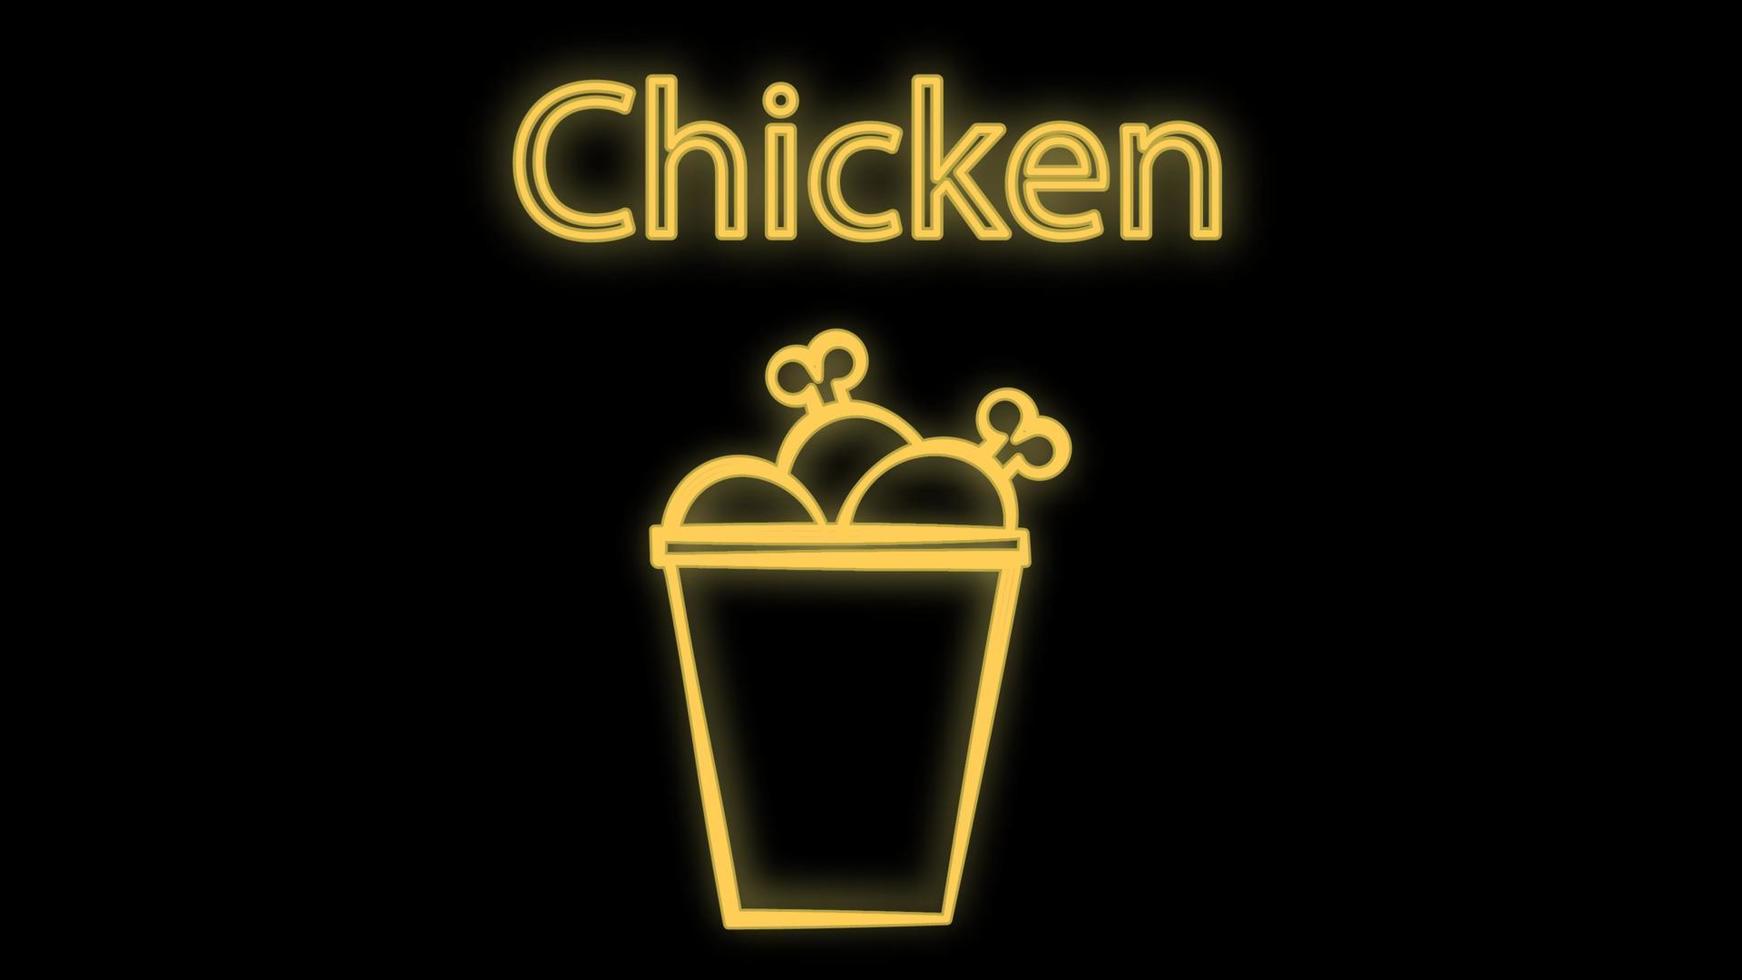 chicken legs on a black background, vector illustration. neon sign. neon orange color. glowing box with the inscription chicken. breaded chicken legs, fast food food, quick snack